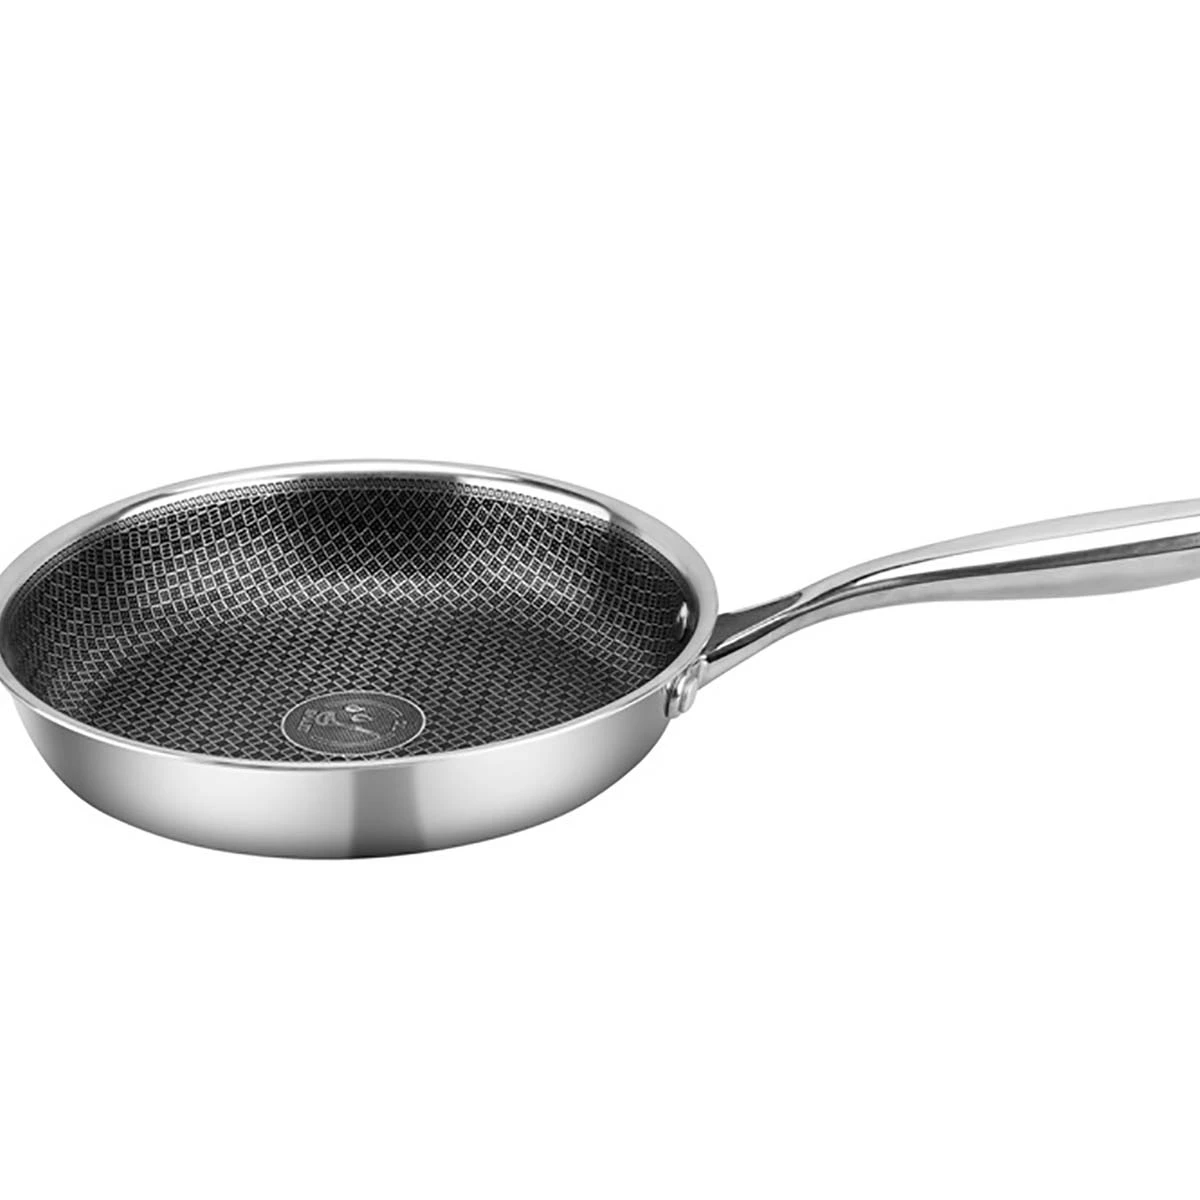 Amercook warehouses in the US Kitchen Stainless Steel Induction Fry Pan saute pan stainless steel frying